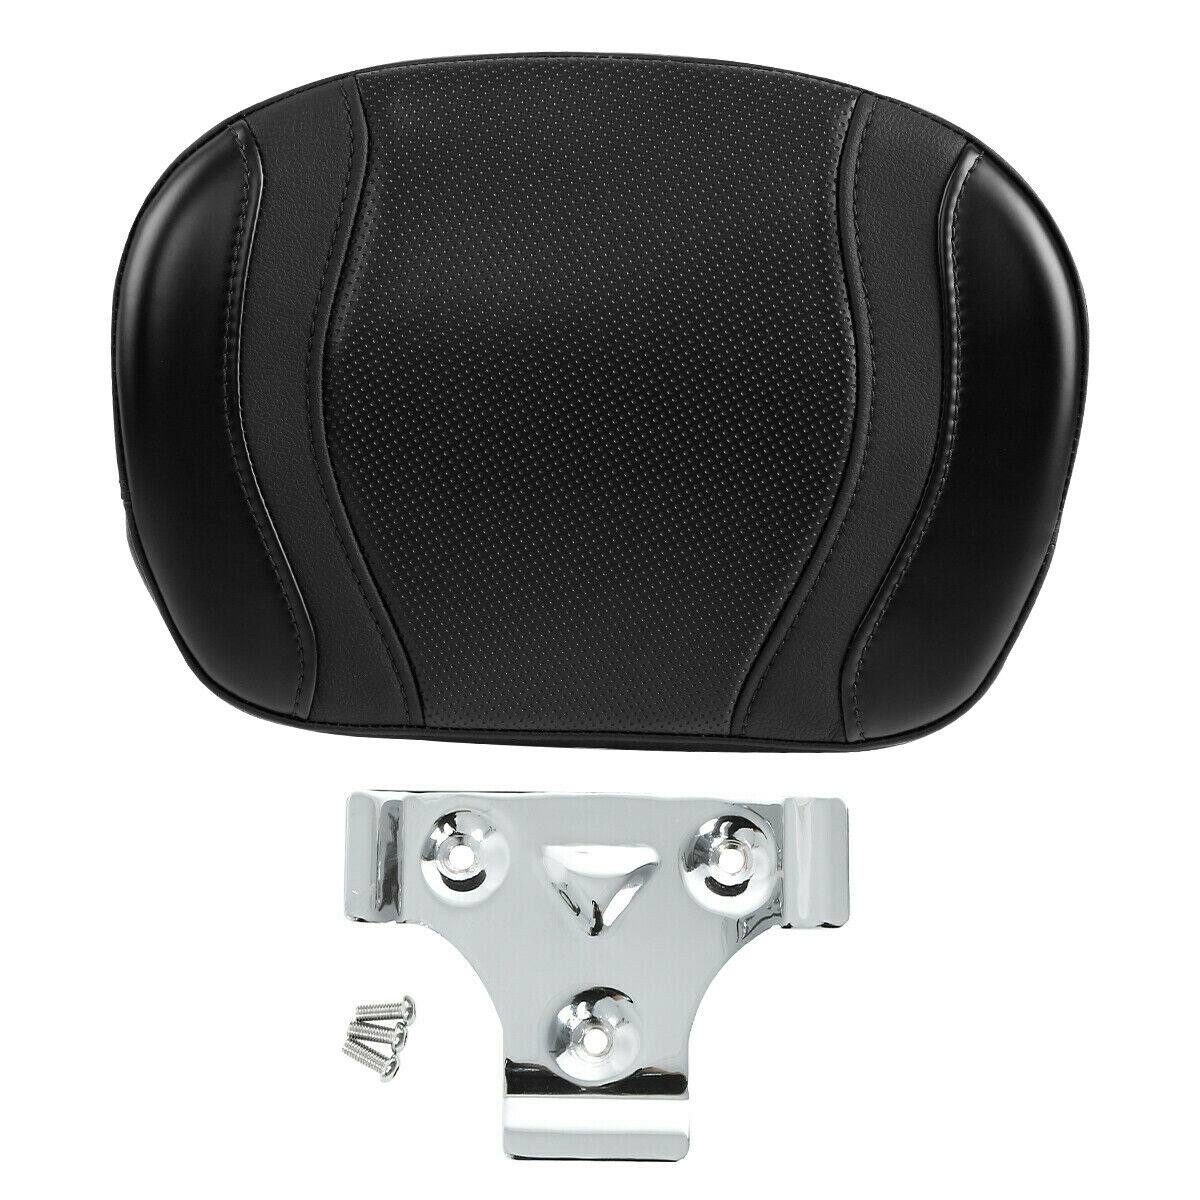 Sissy Bar Passenger Pad Fit For Harley Touring Electra Glide Softail Low Rider - Moto Life Products